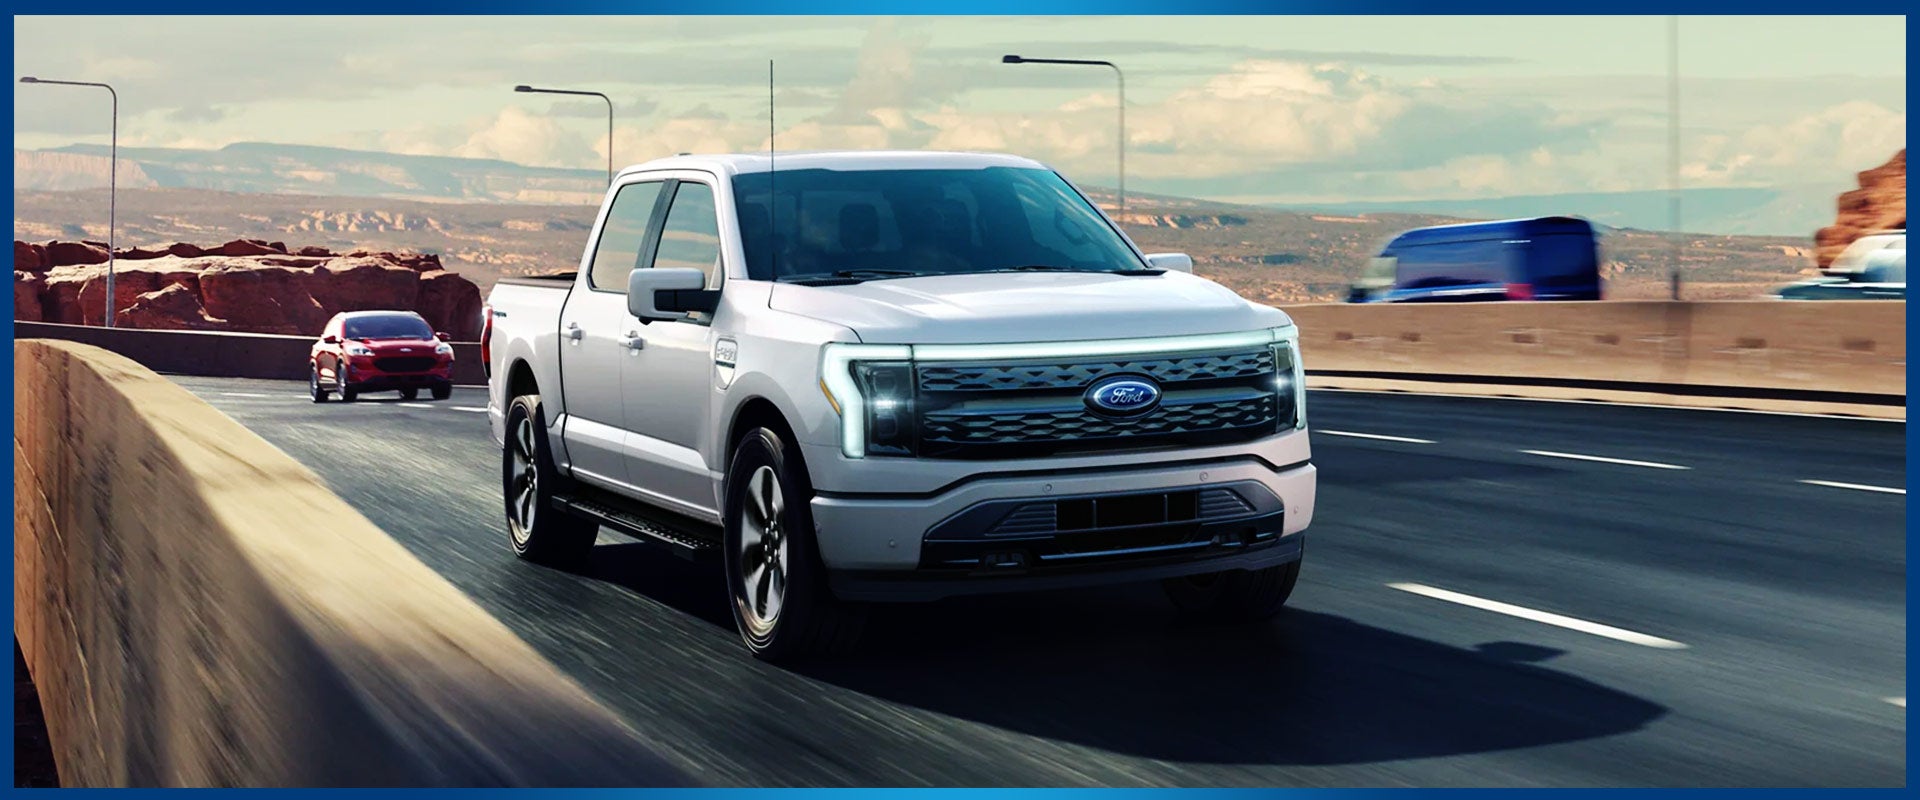 2022 Ford F-150 Lightning | Range, Towing Capacity & More ...